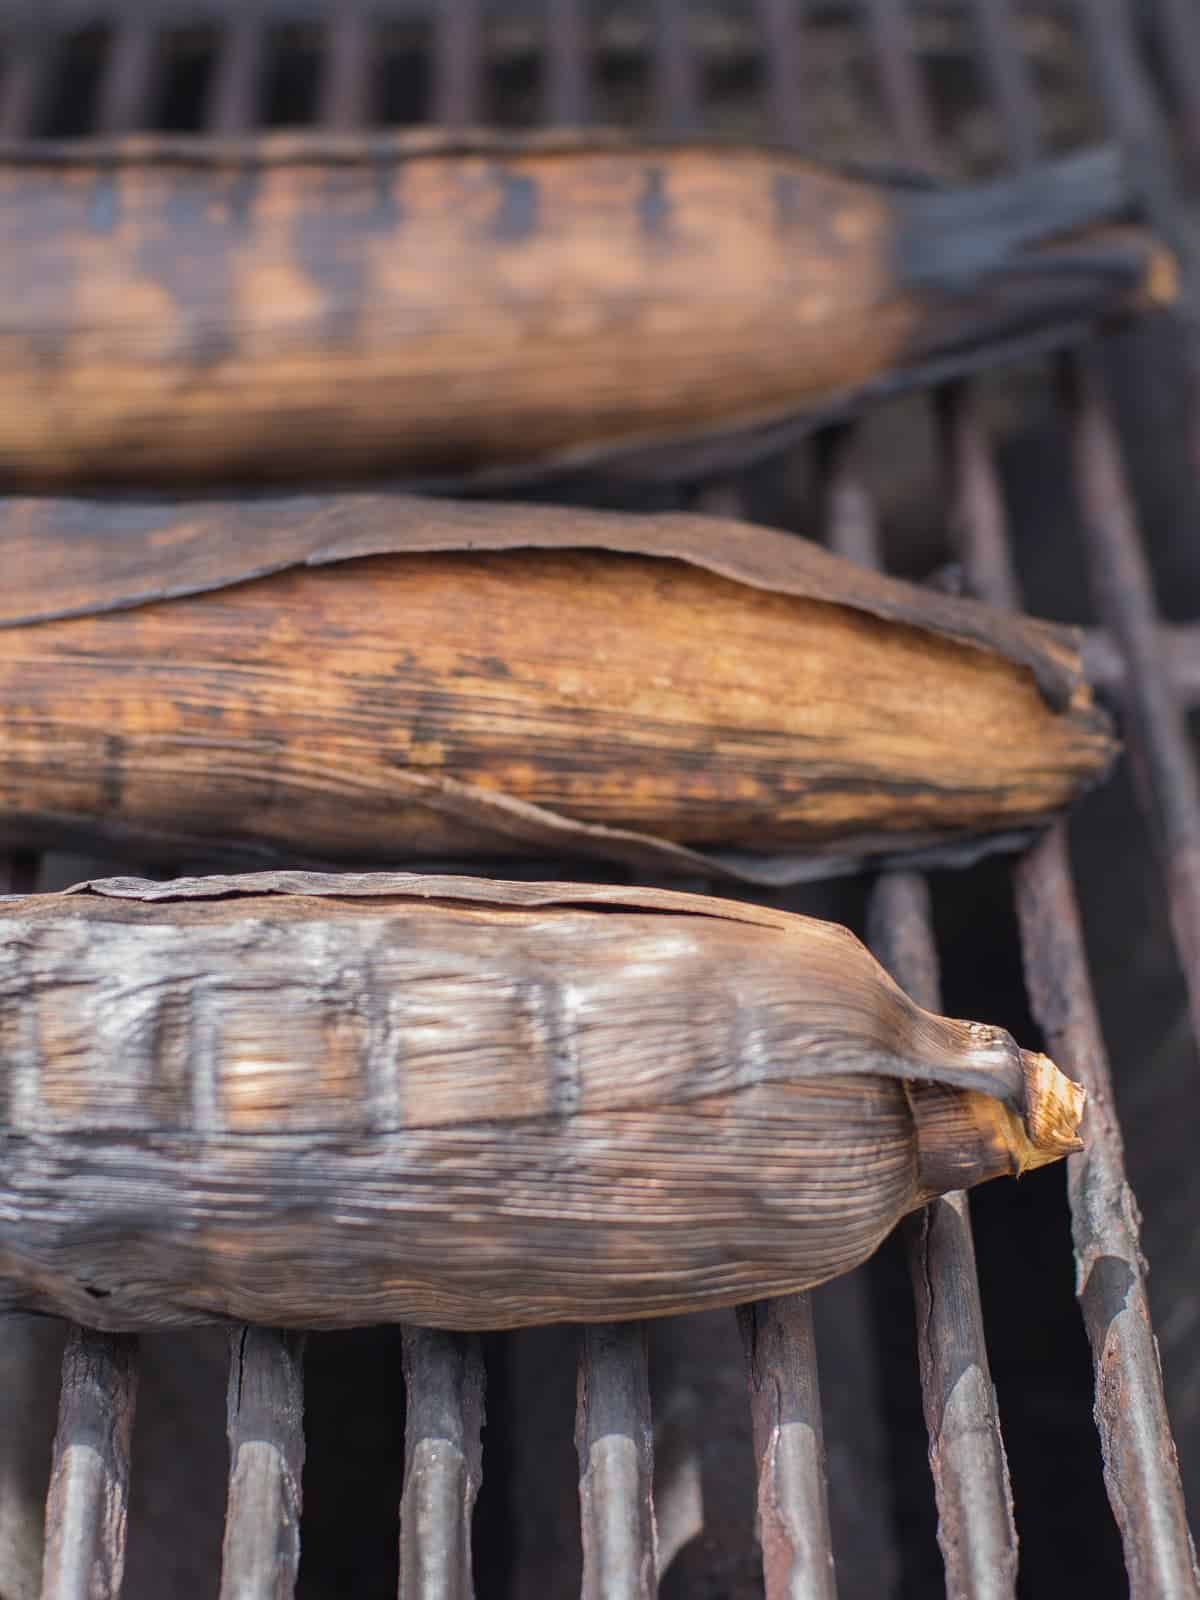 corn on the cob being grilled with the husks on